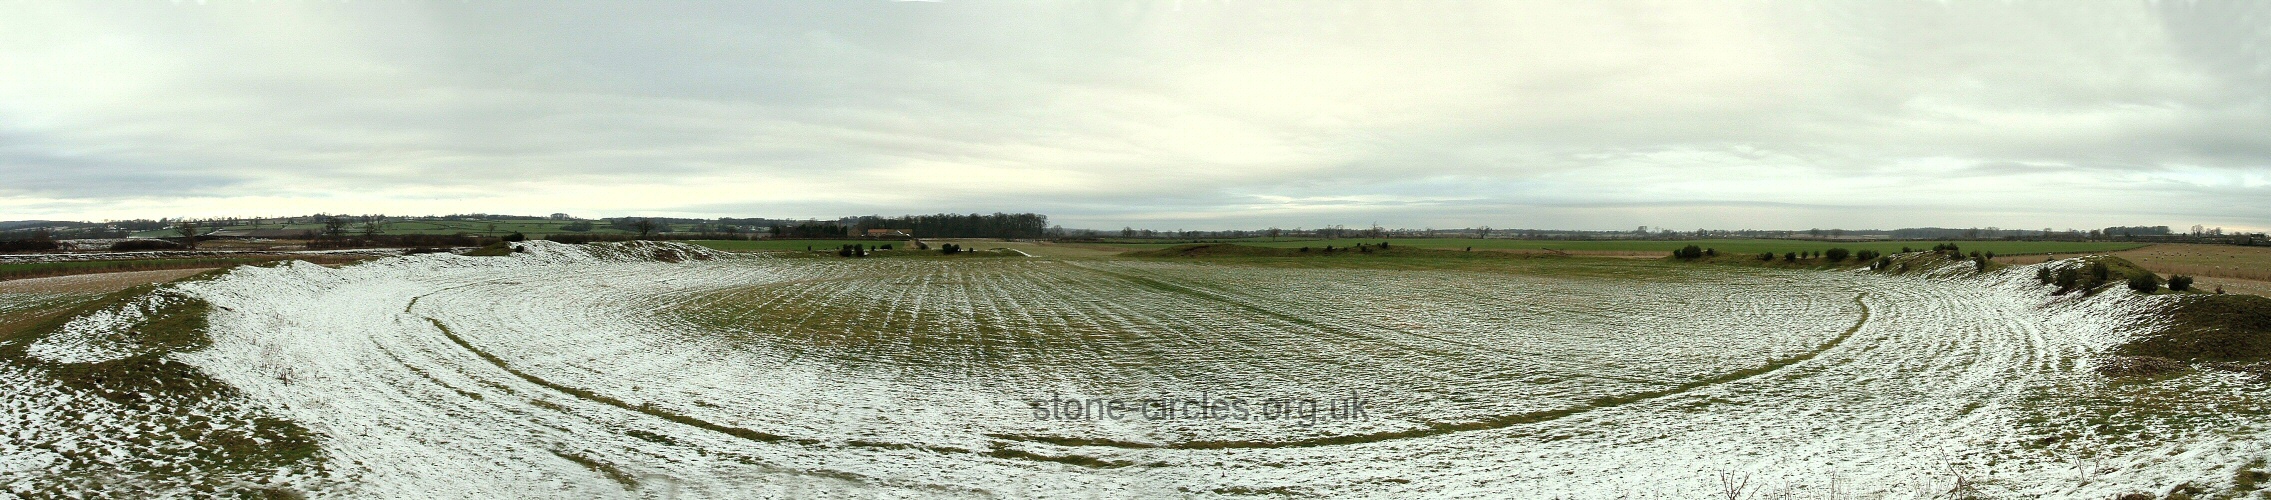 Thornborough Henge - Panoramic view of the central henge from the highest point of the bank beside the southeast entrance